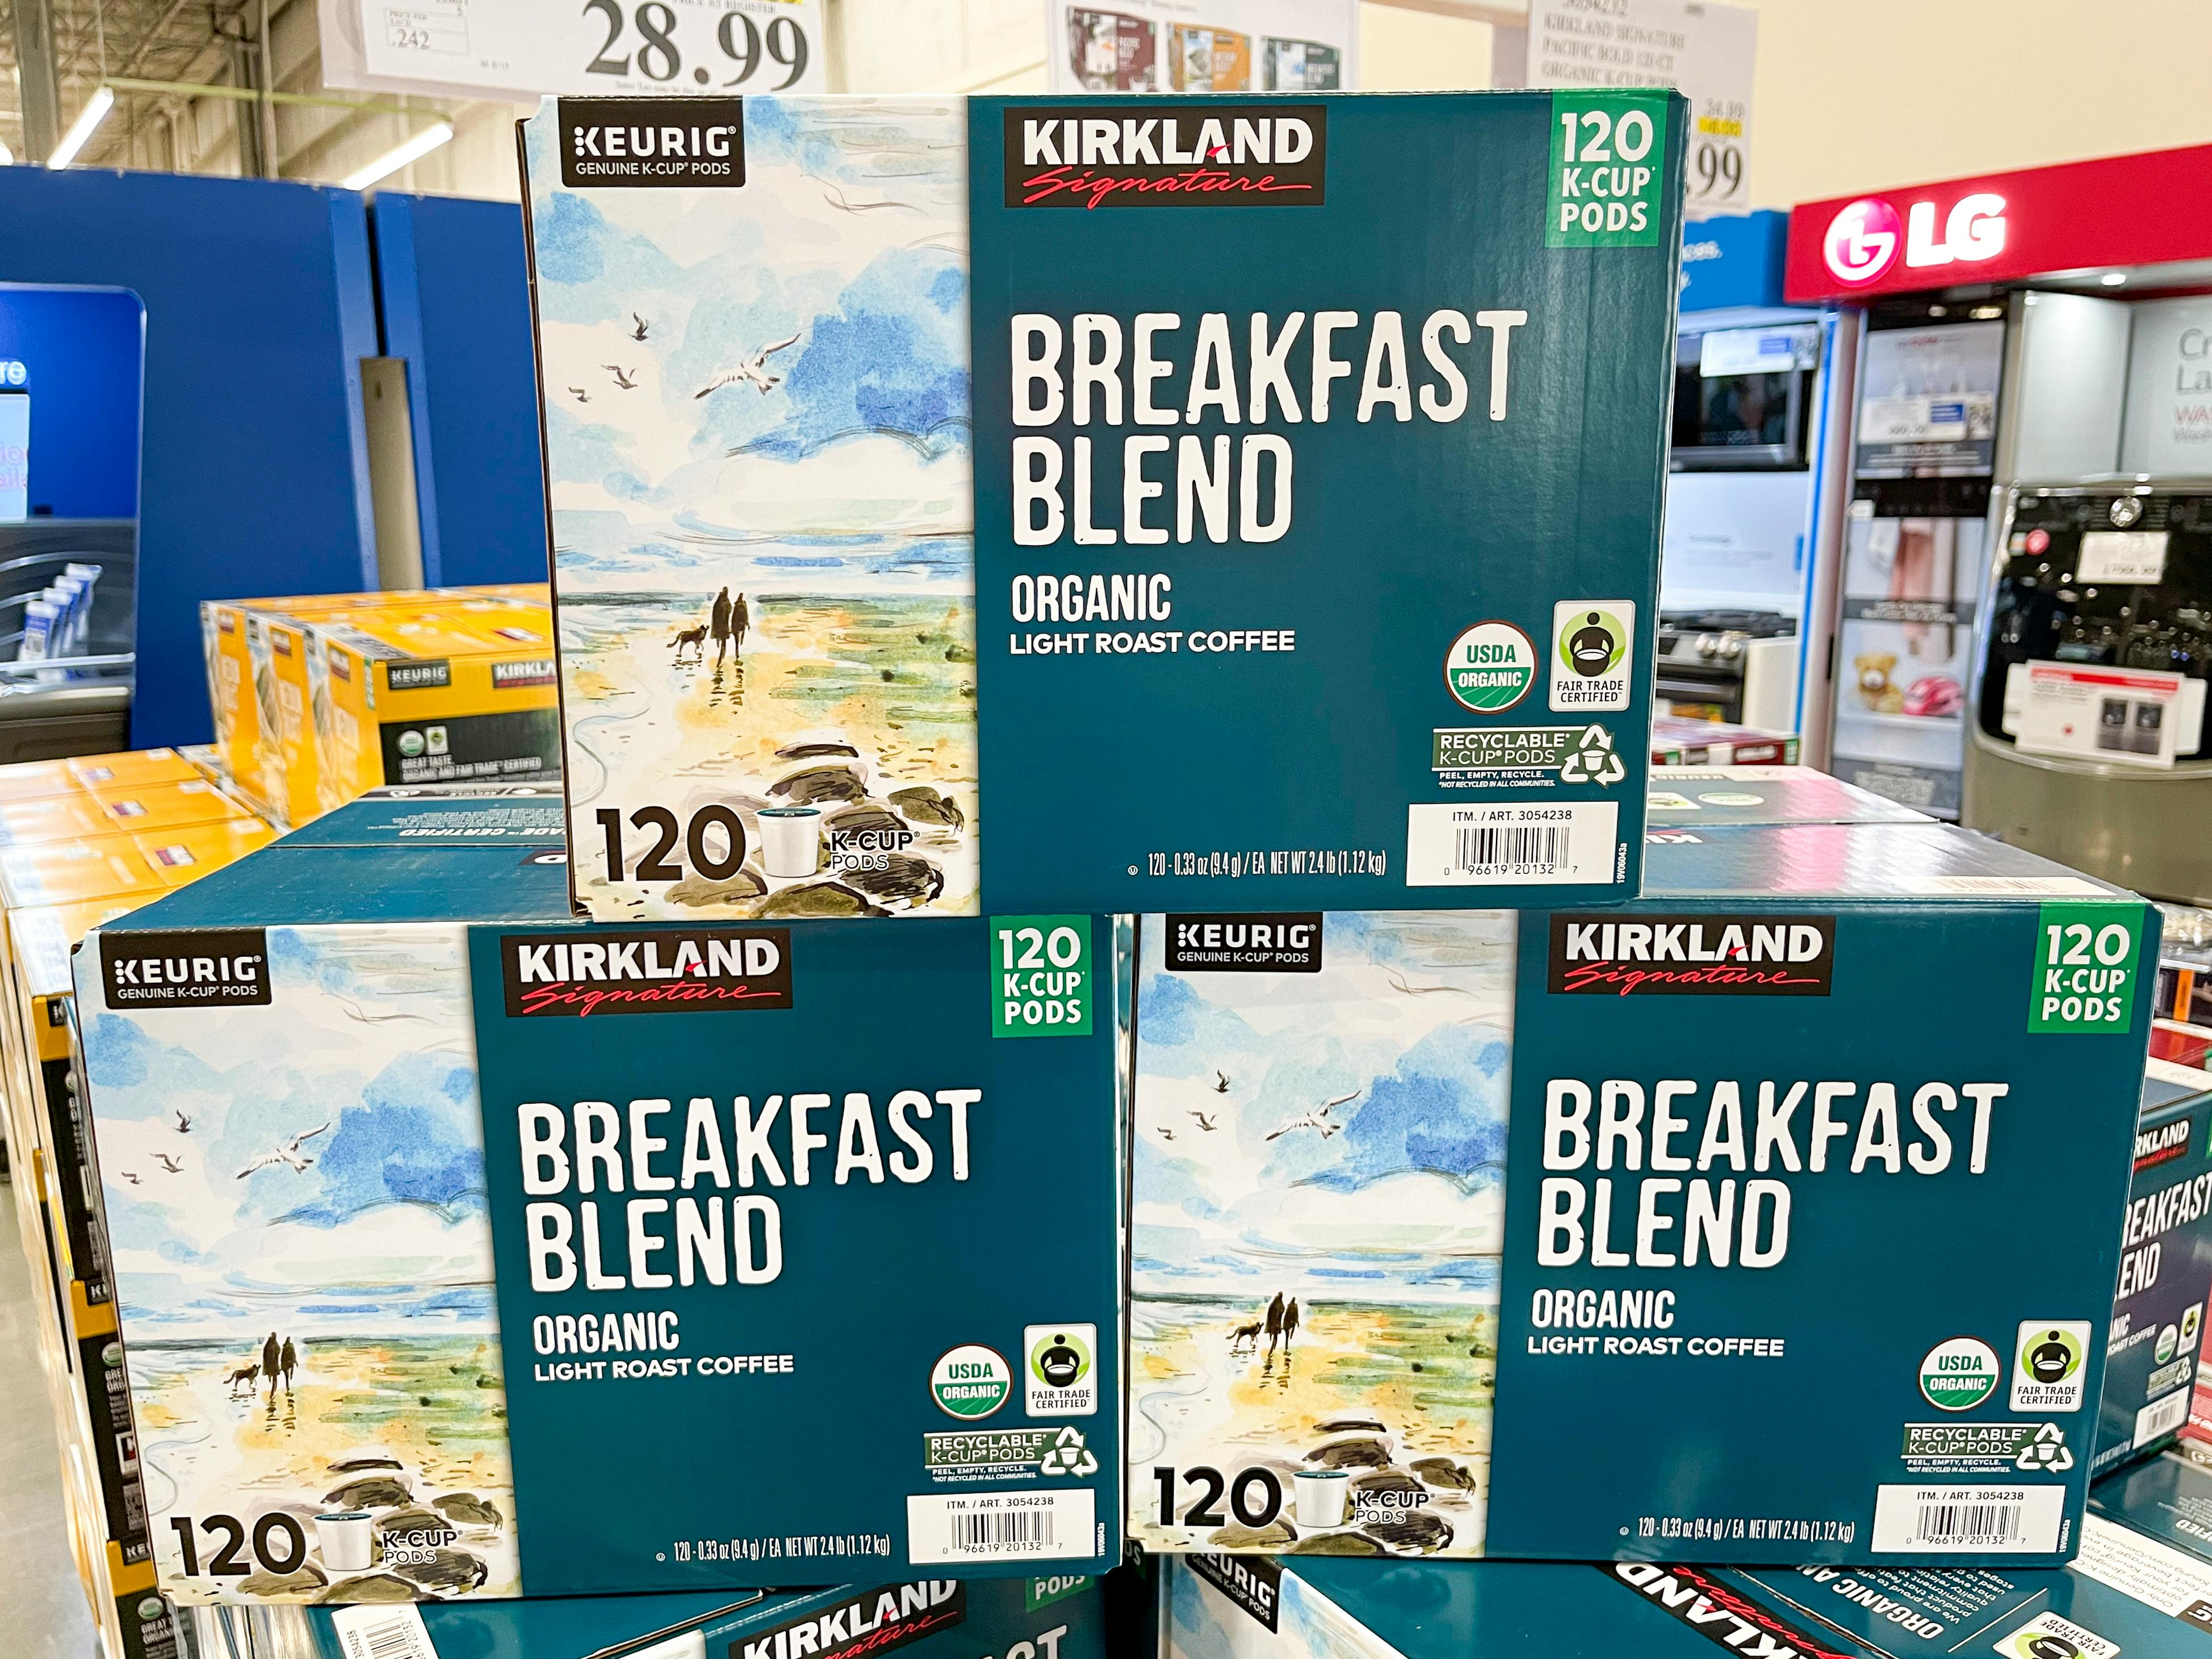 Kirkland brand Breakfast blend organic coffee k cups stacked in a pile of 3 at Costco.